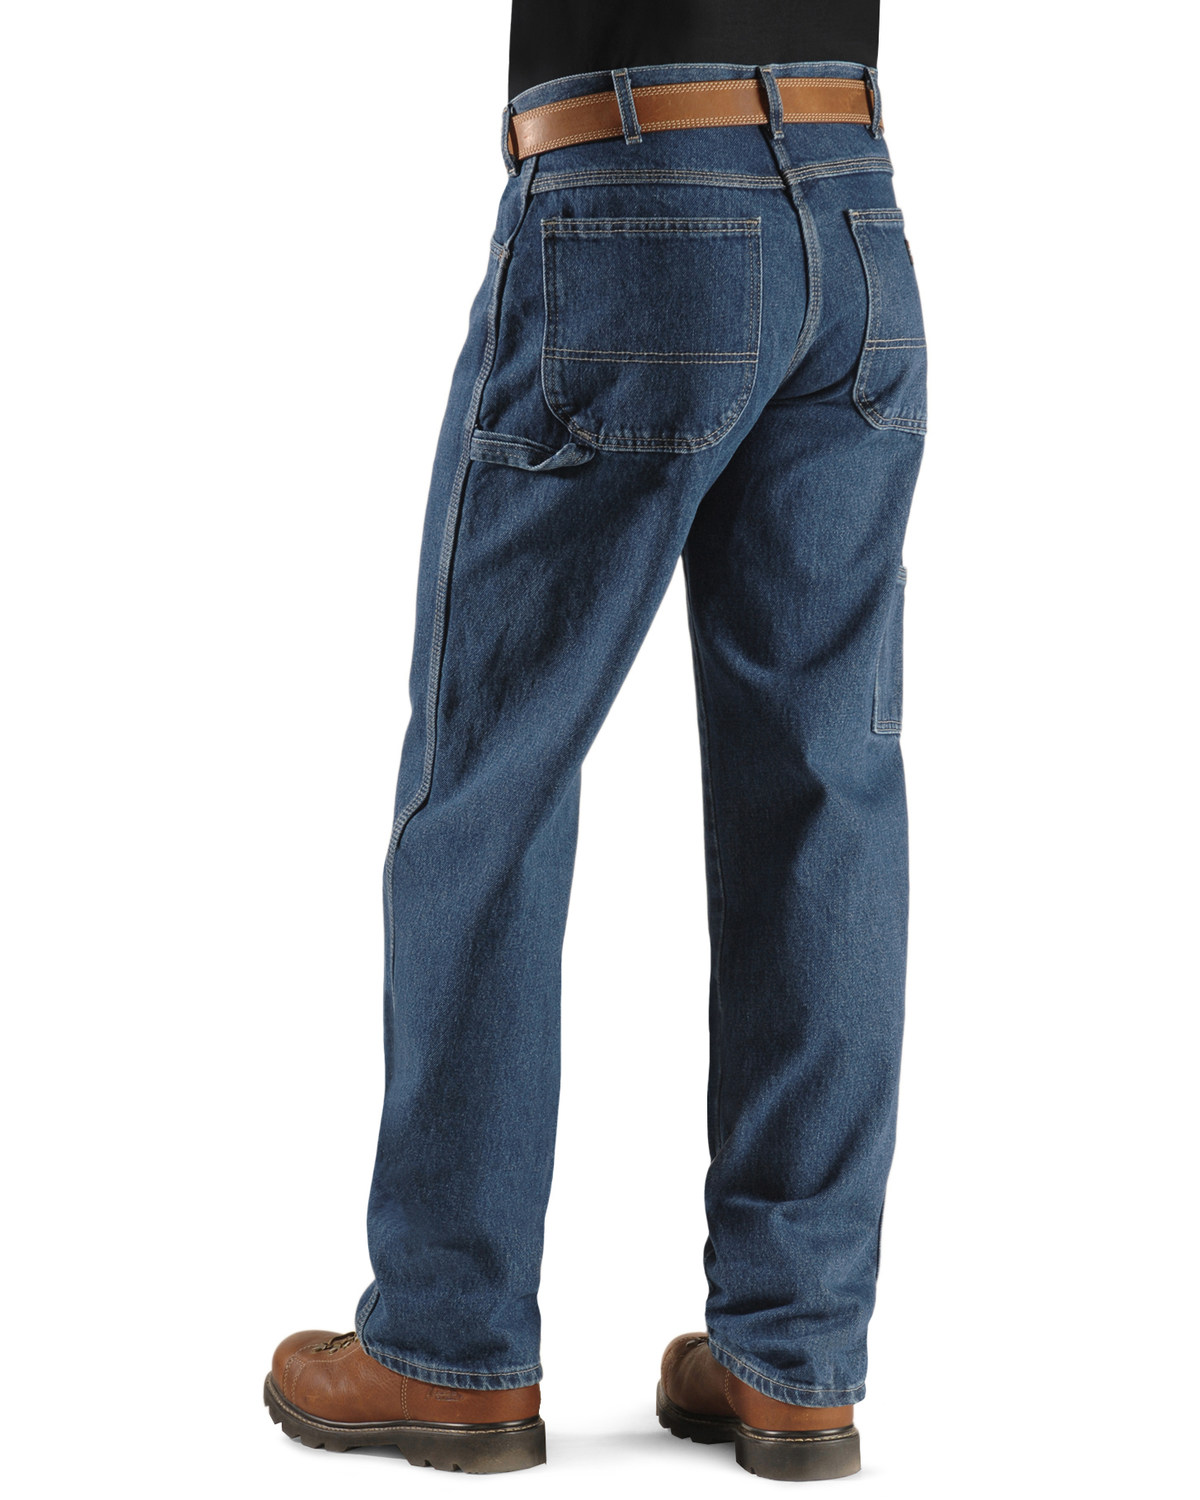 dickies carpenter jean relaxed fit